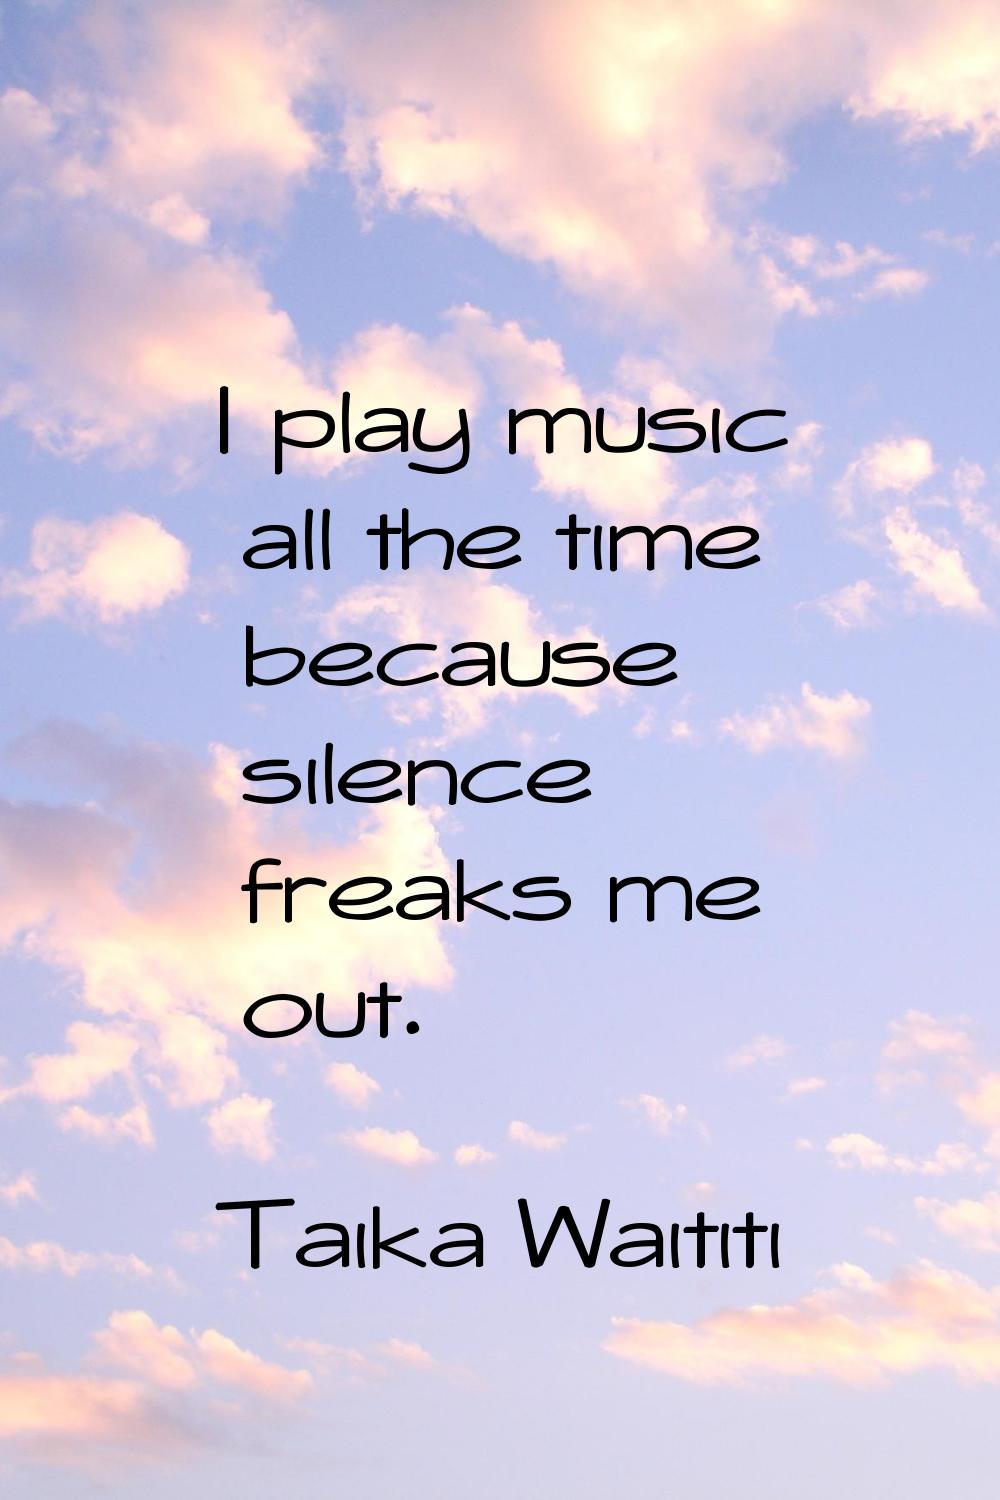 I play music all the time because silence freaks me out.